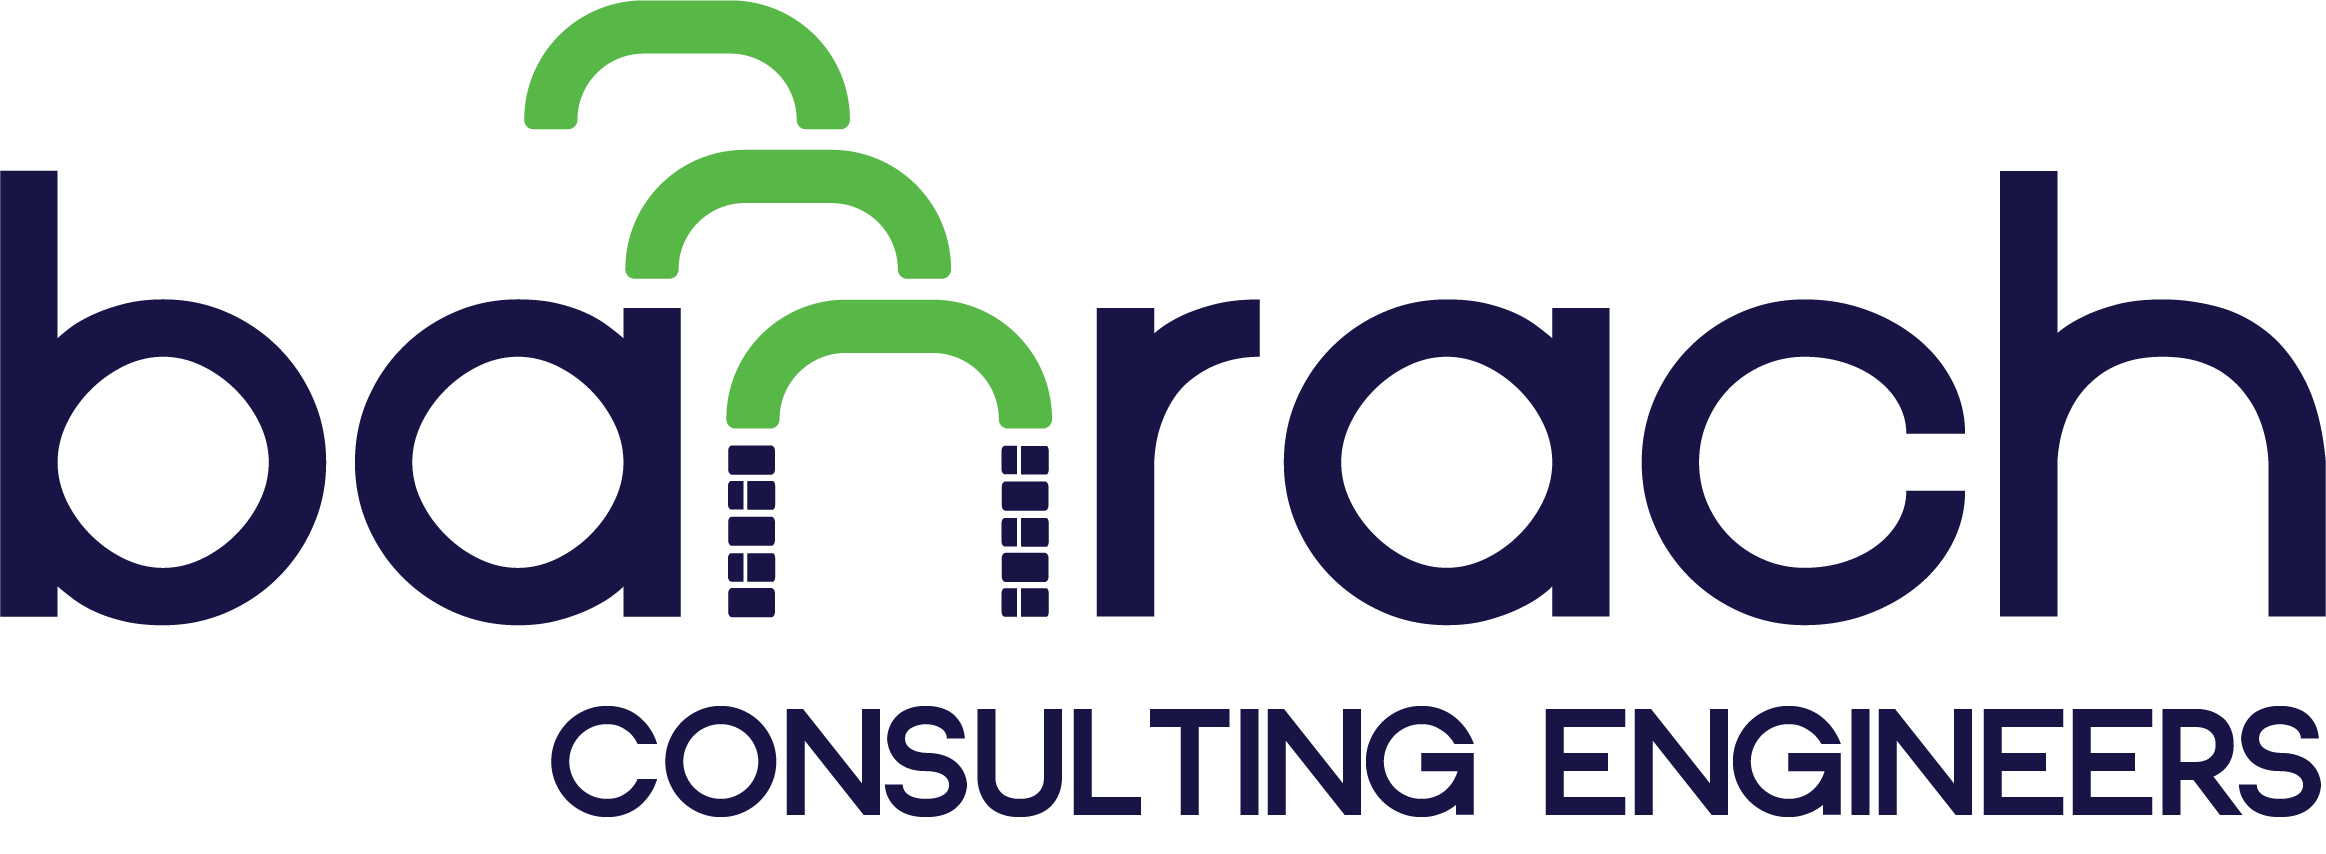 banrach consulting engineers